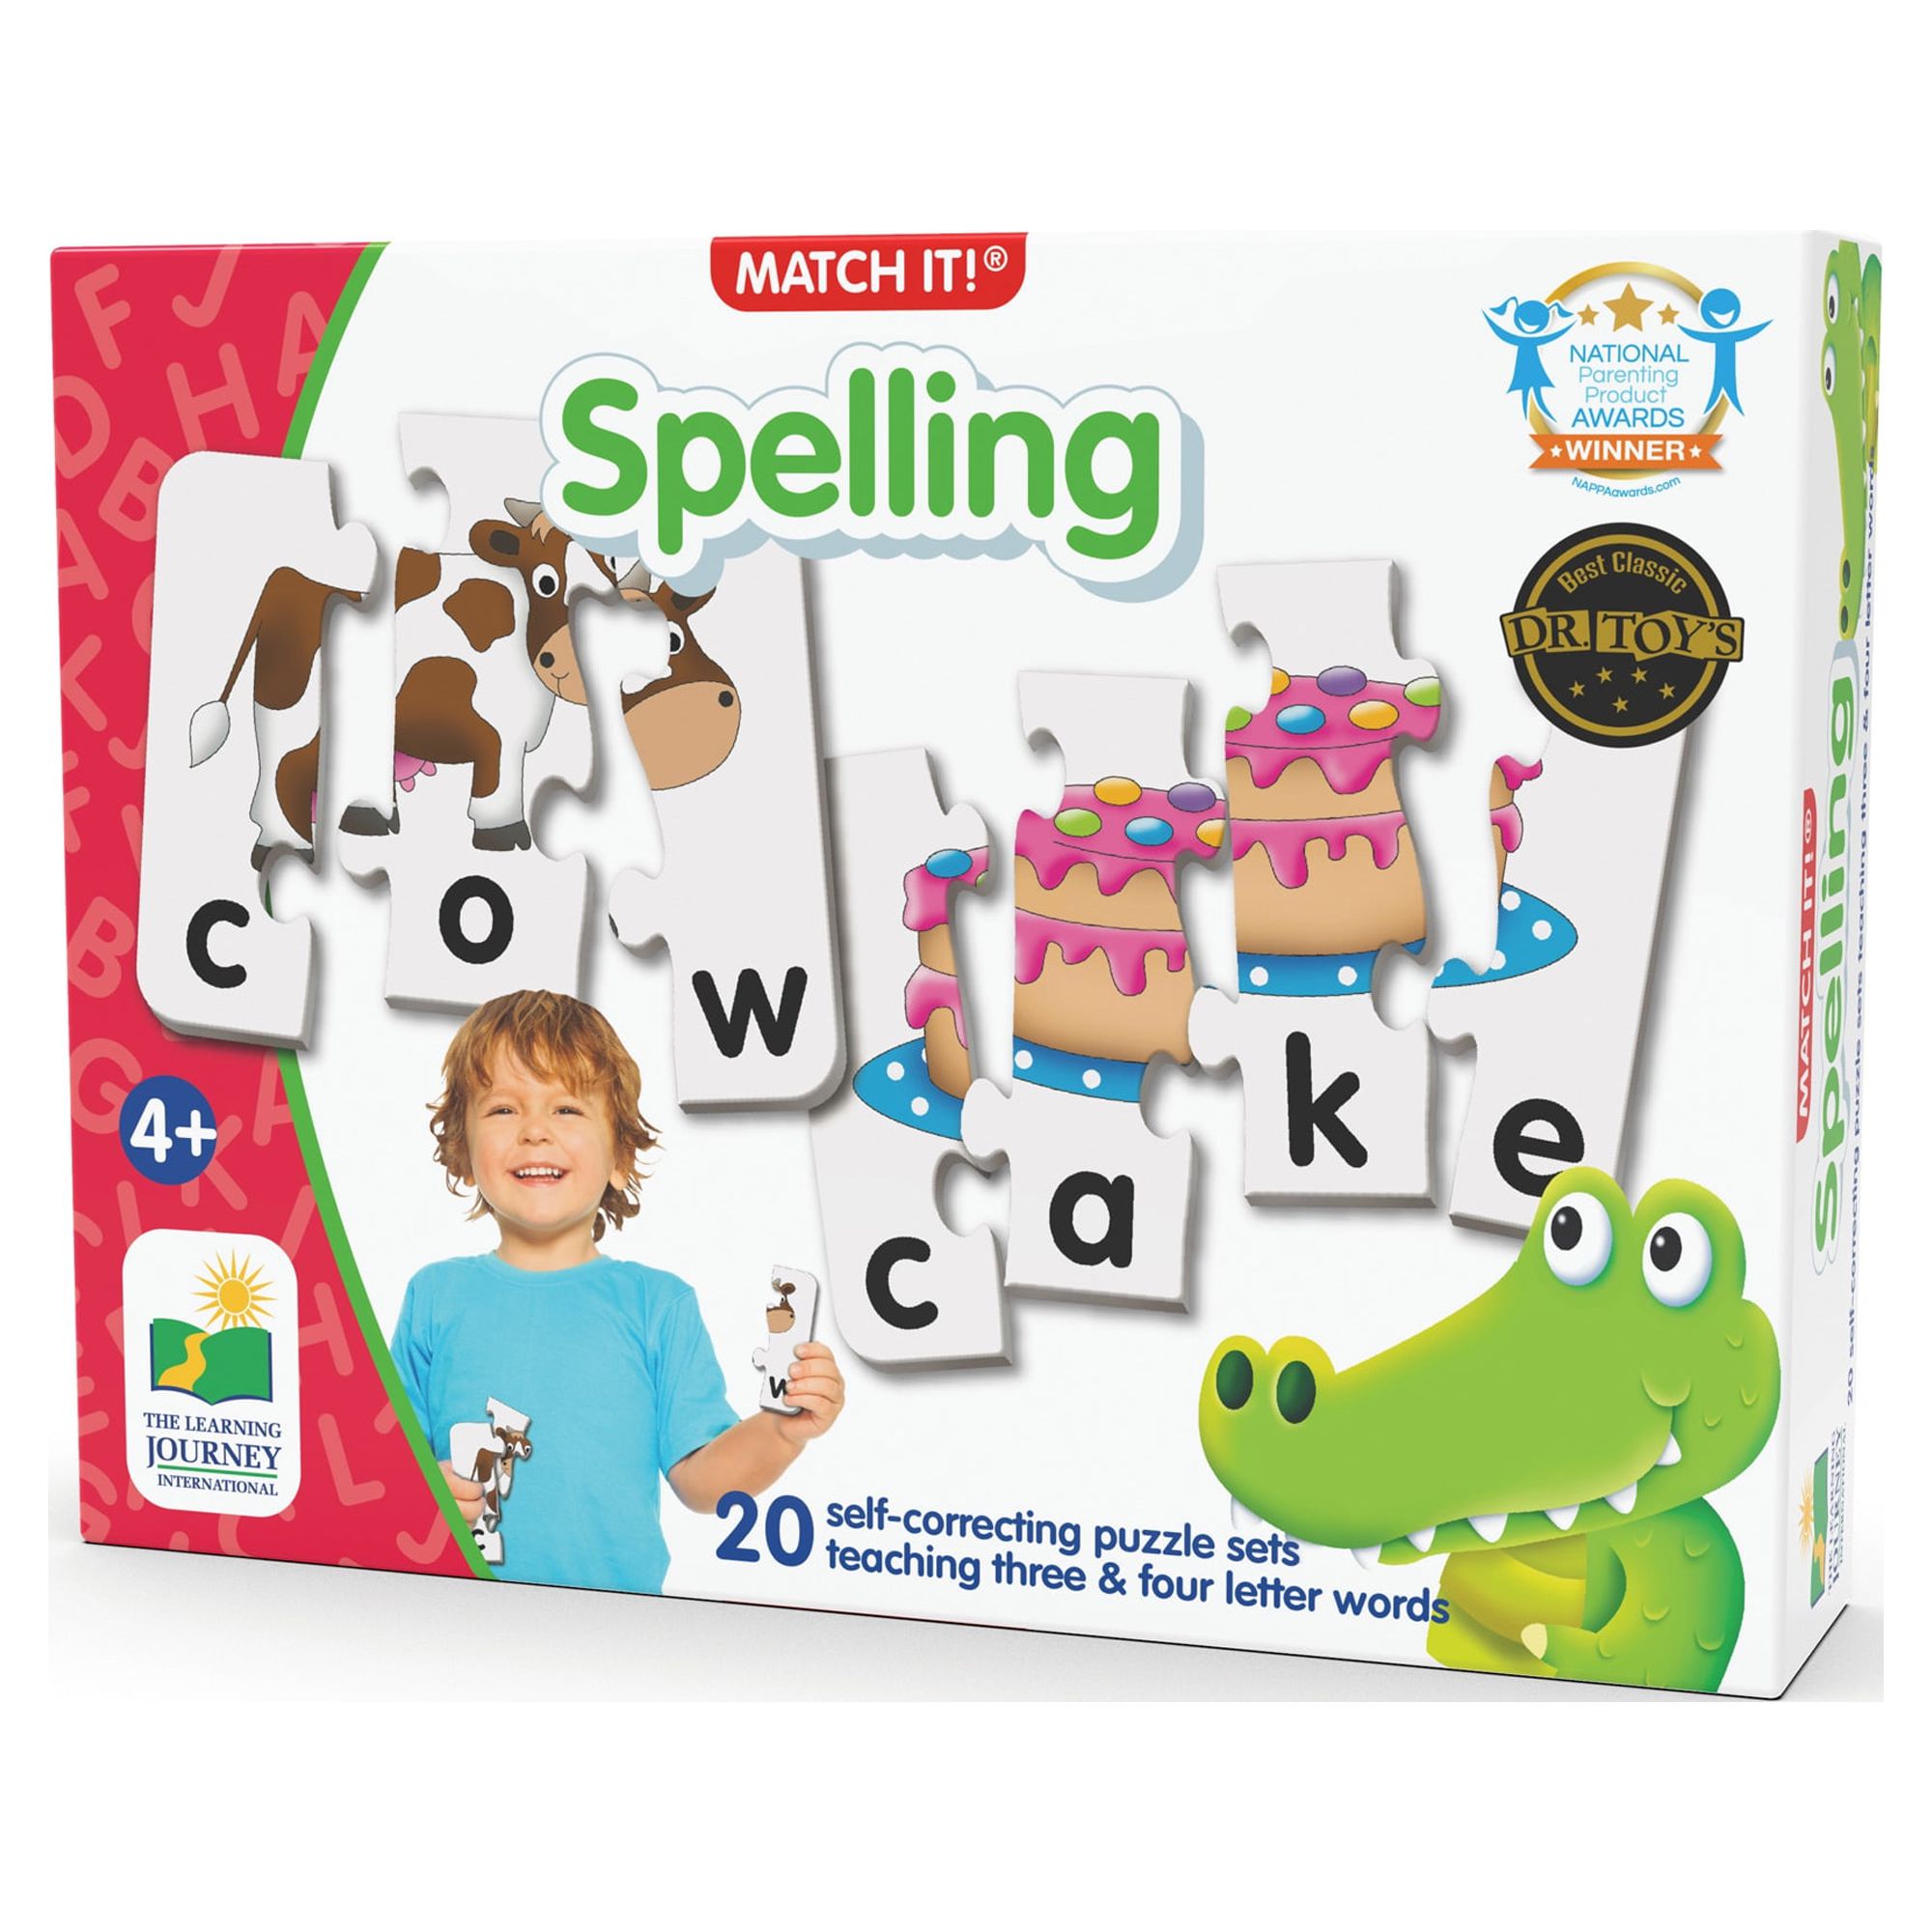 The Learning Journey 20-Piece Spelling Educational Jigsaw Puzzles - image 1 of 5